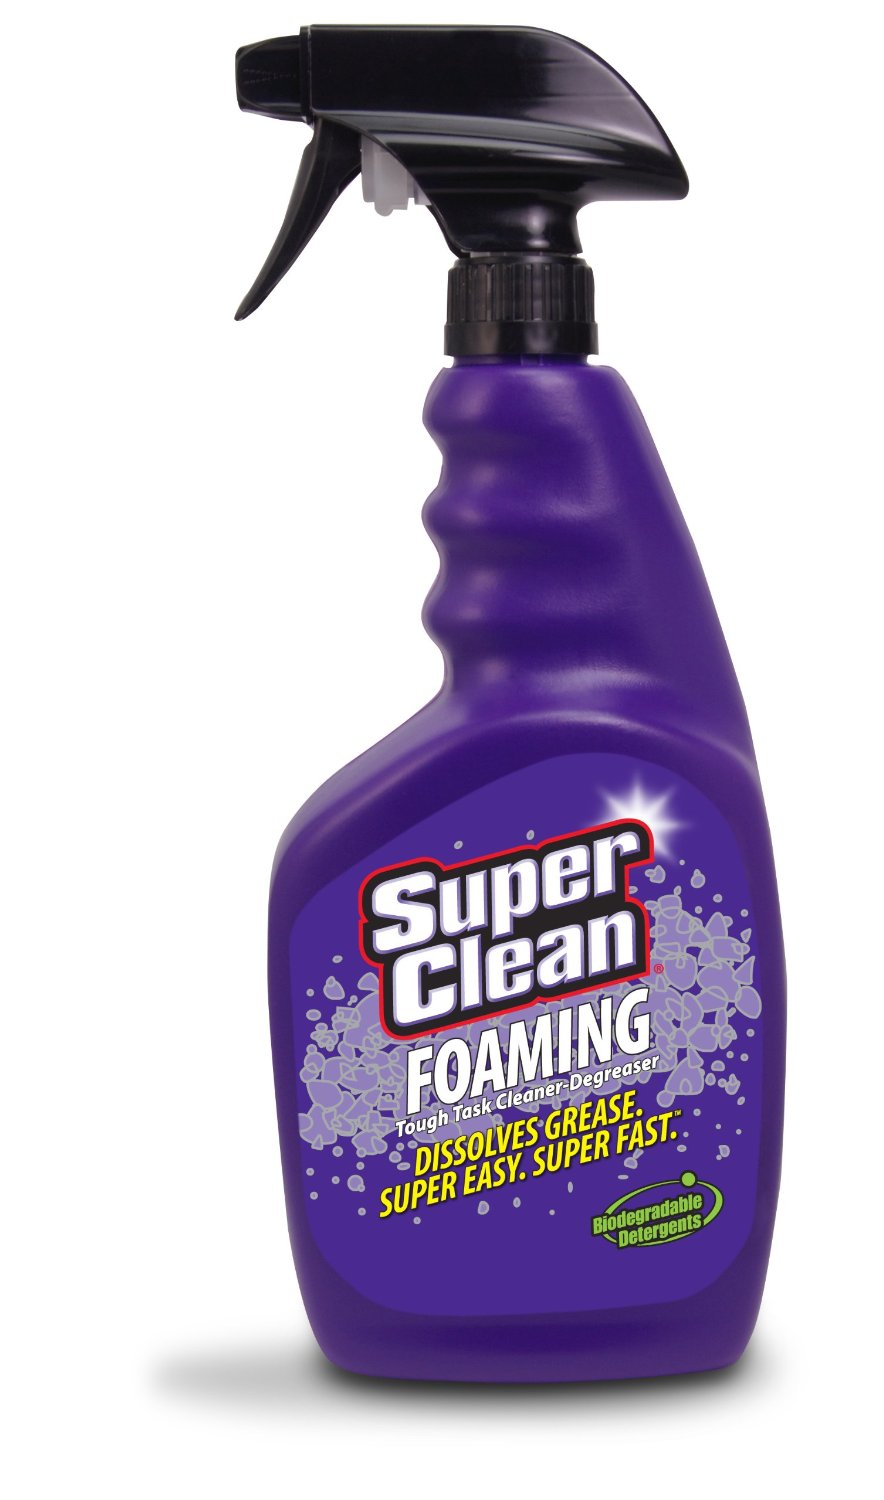 Gunk Engine Cleaner and Degreaser, 17 oz. Size FEB1CA